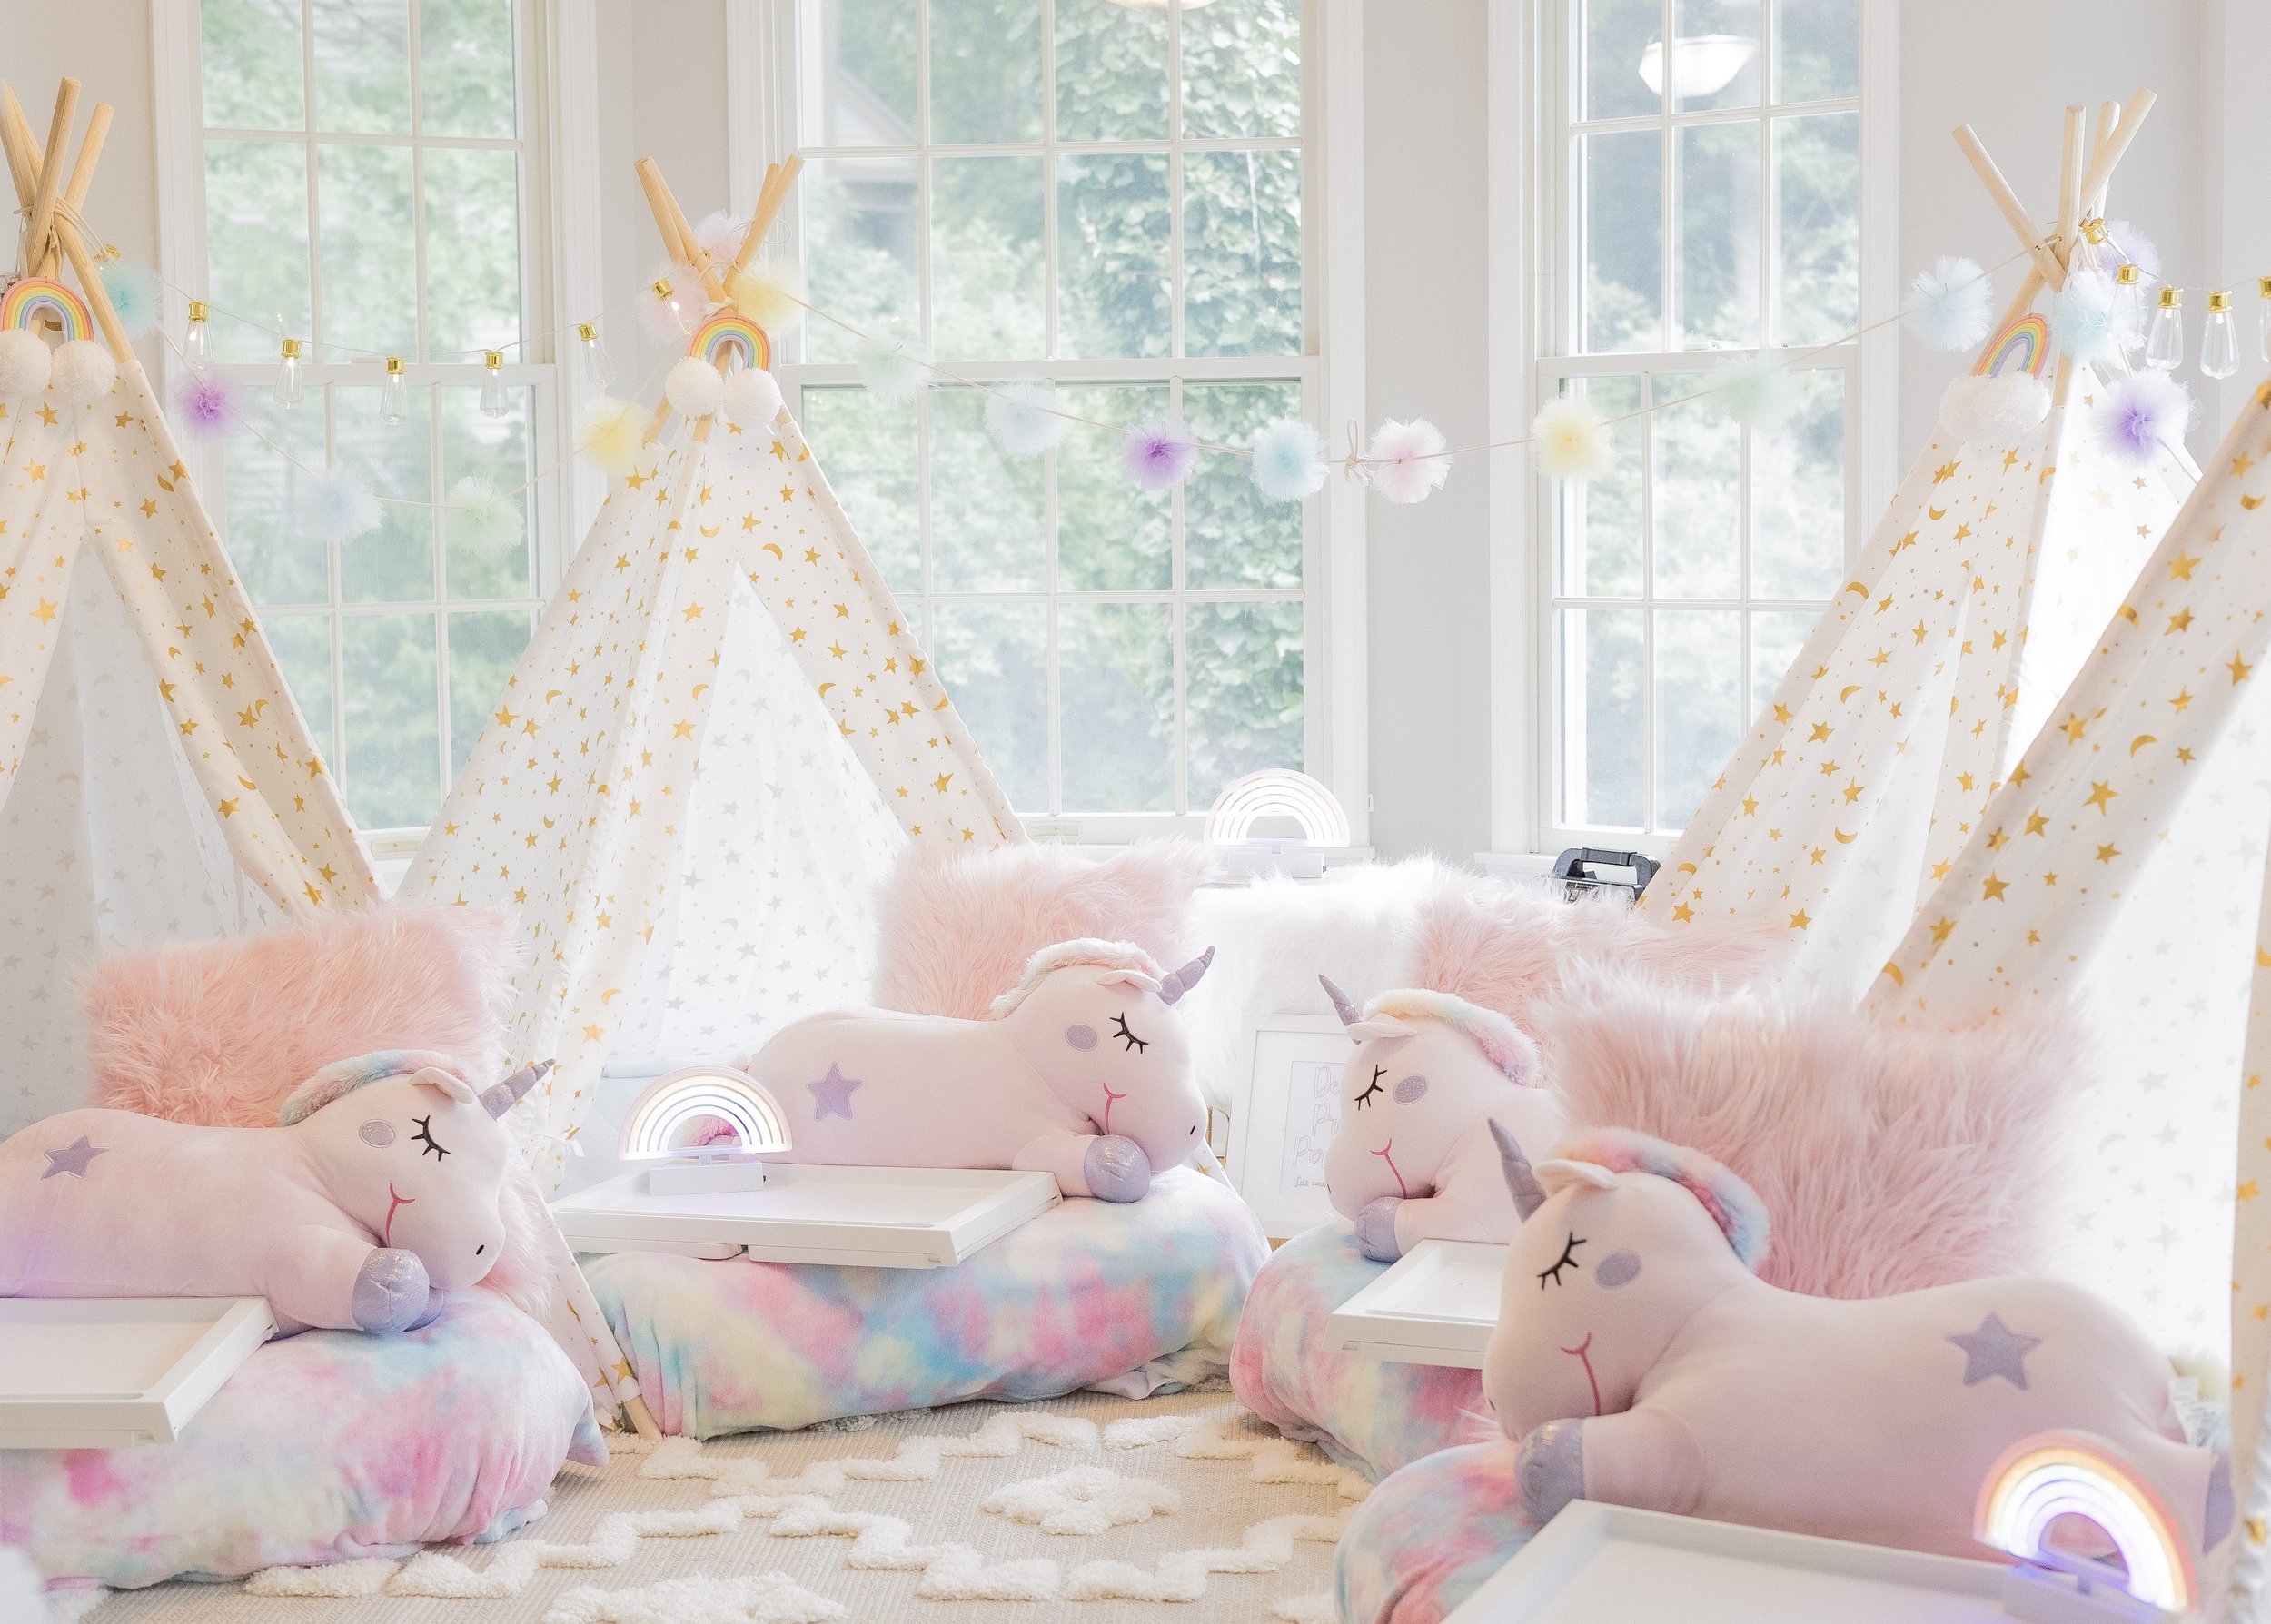 Practically Perfect Events - Slumber Party Tent Rentals in Michigan